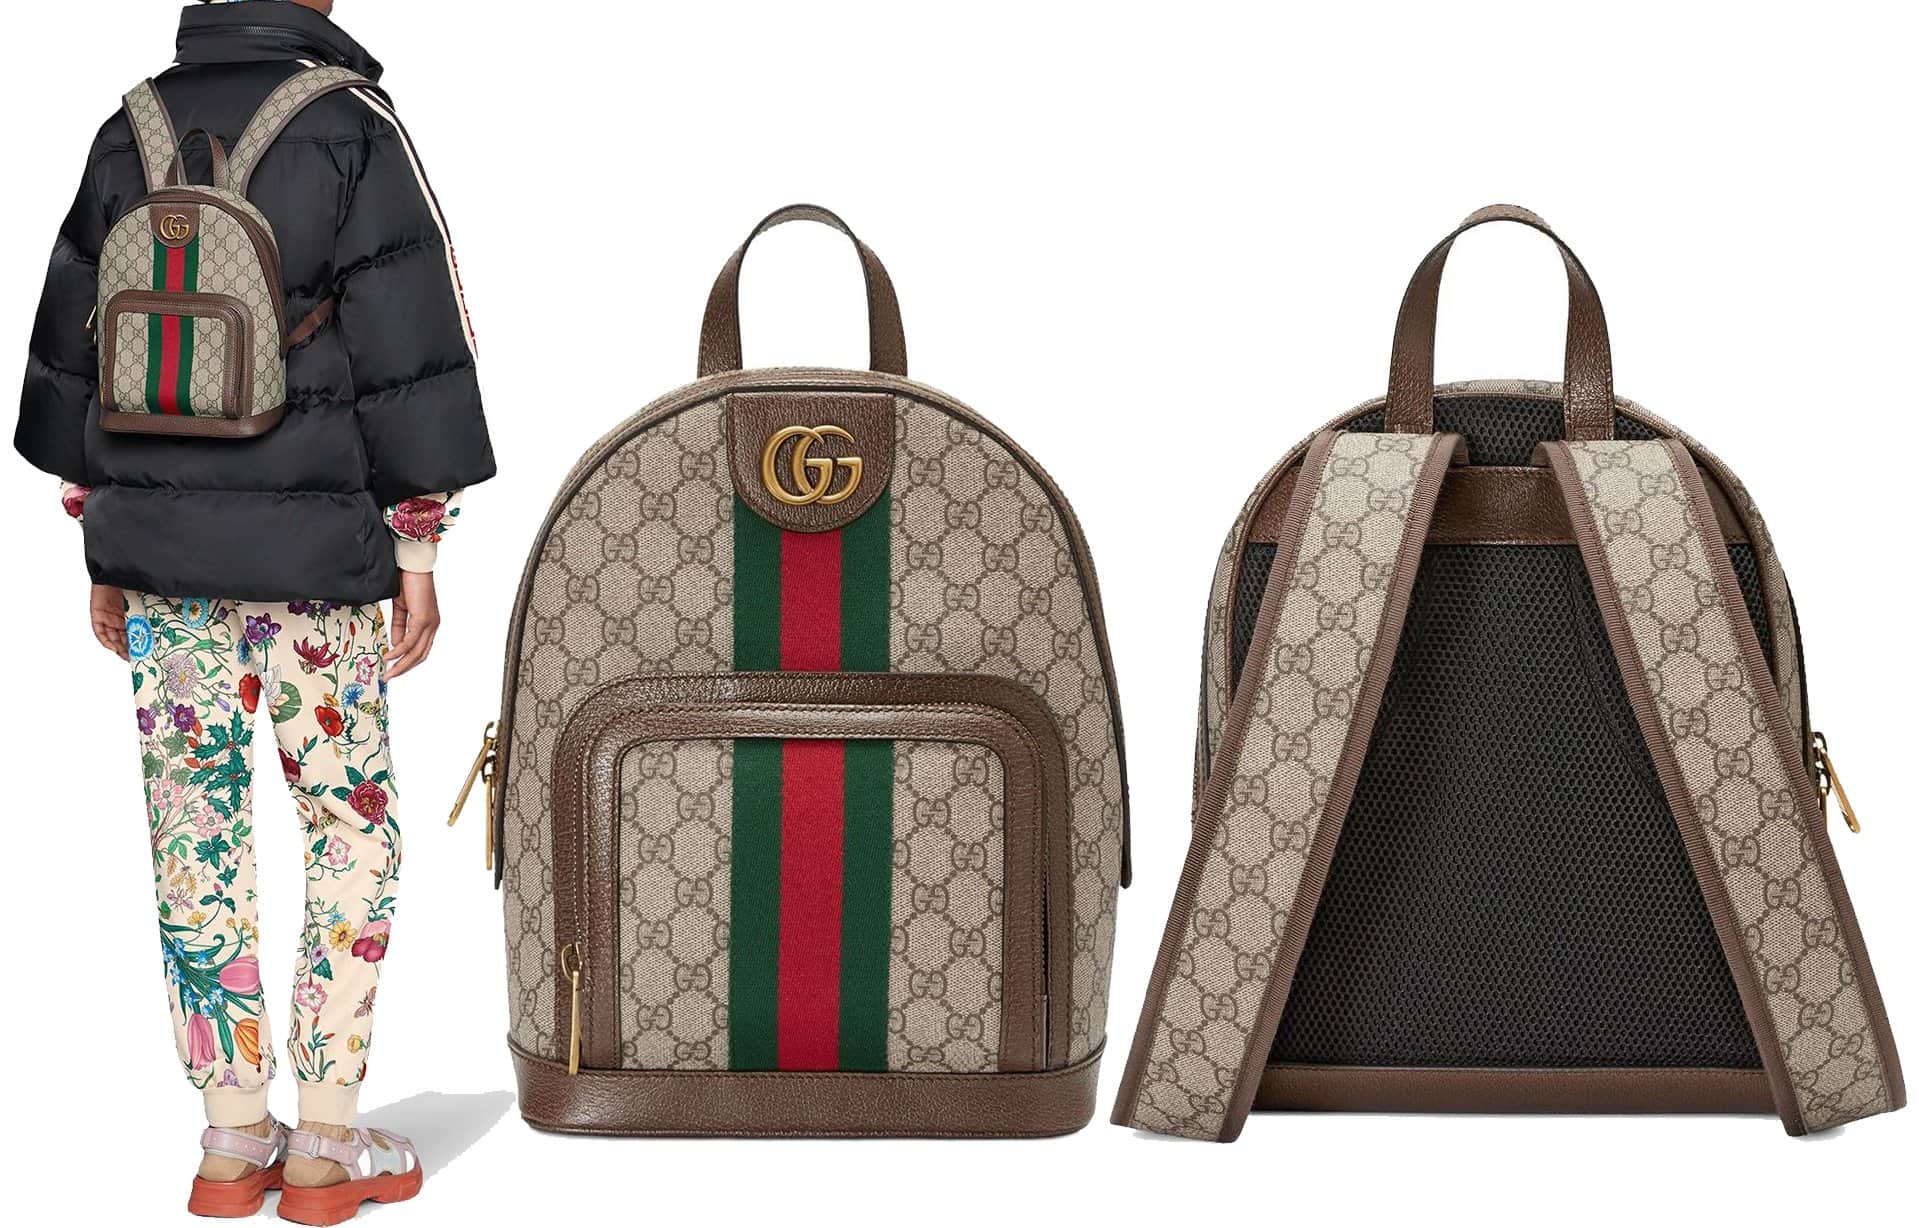 The Ophidia GG small backpack is crafted in GG Supreme canvas with inlaid green and red Web detail and Double G hardware